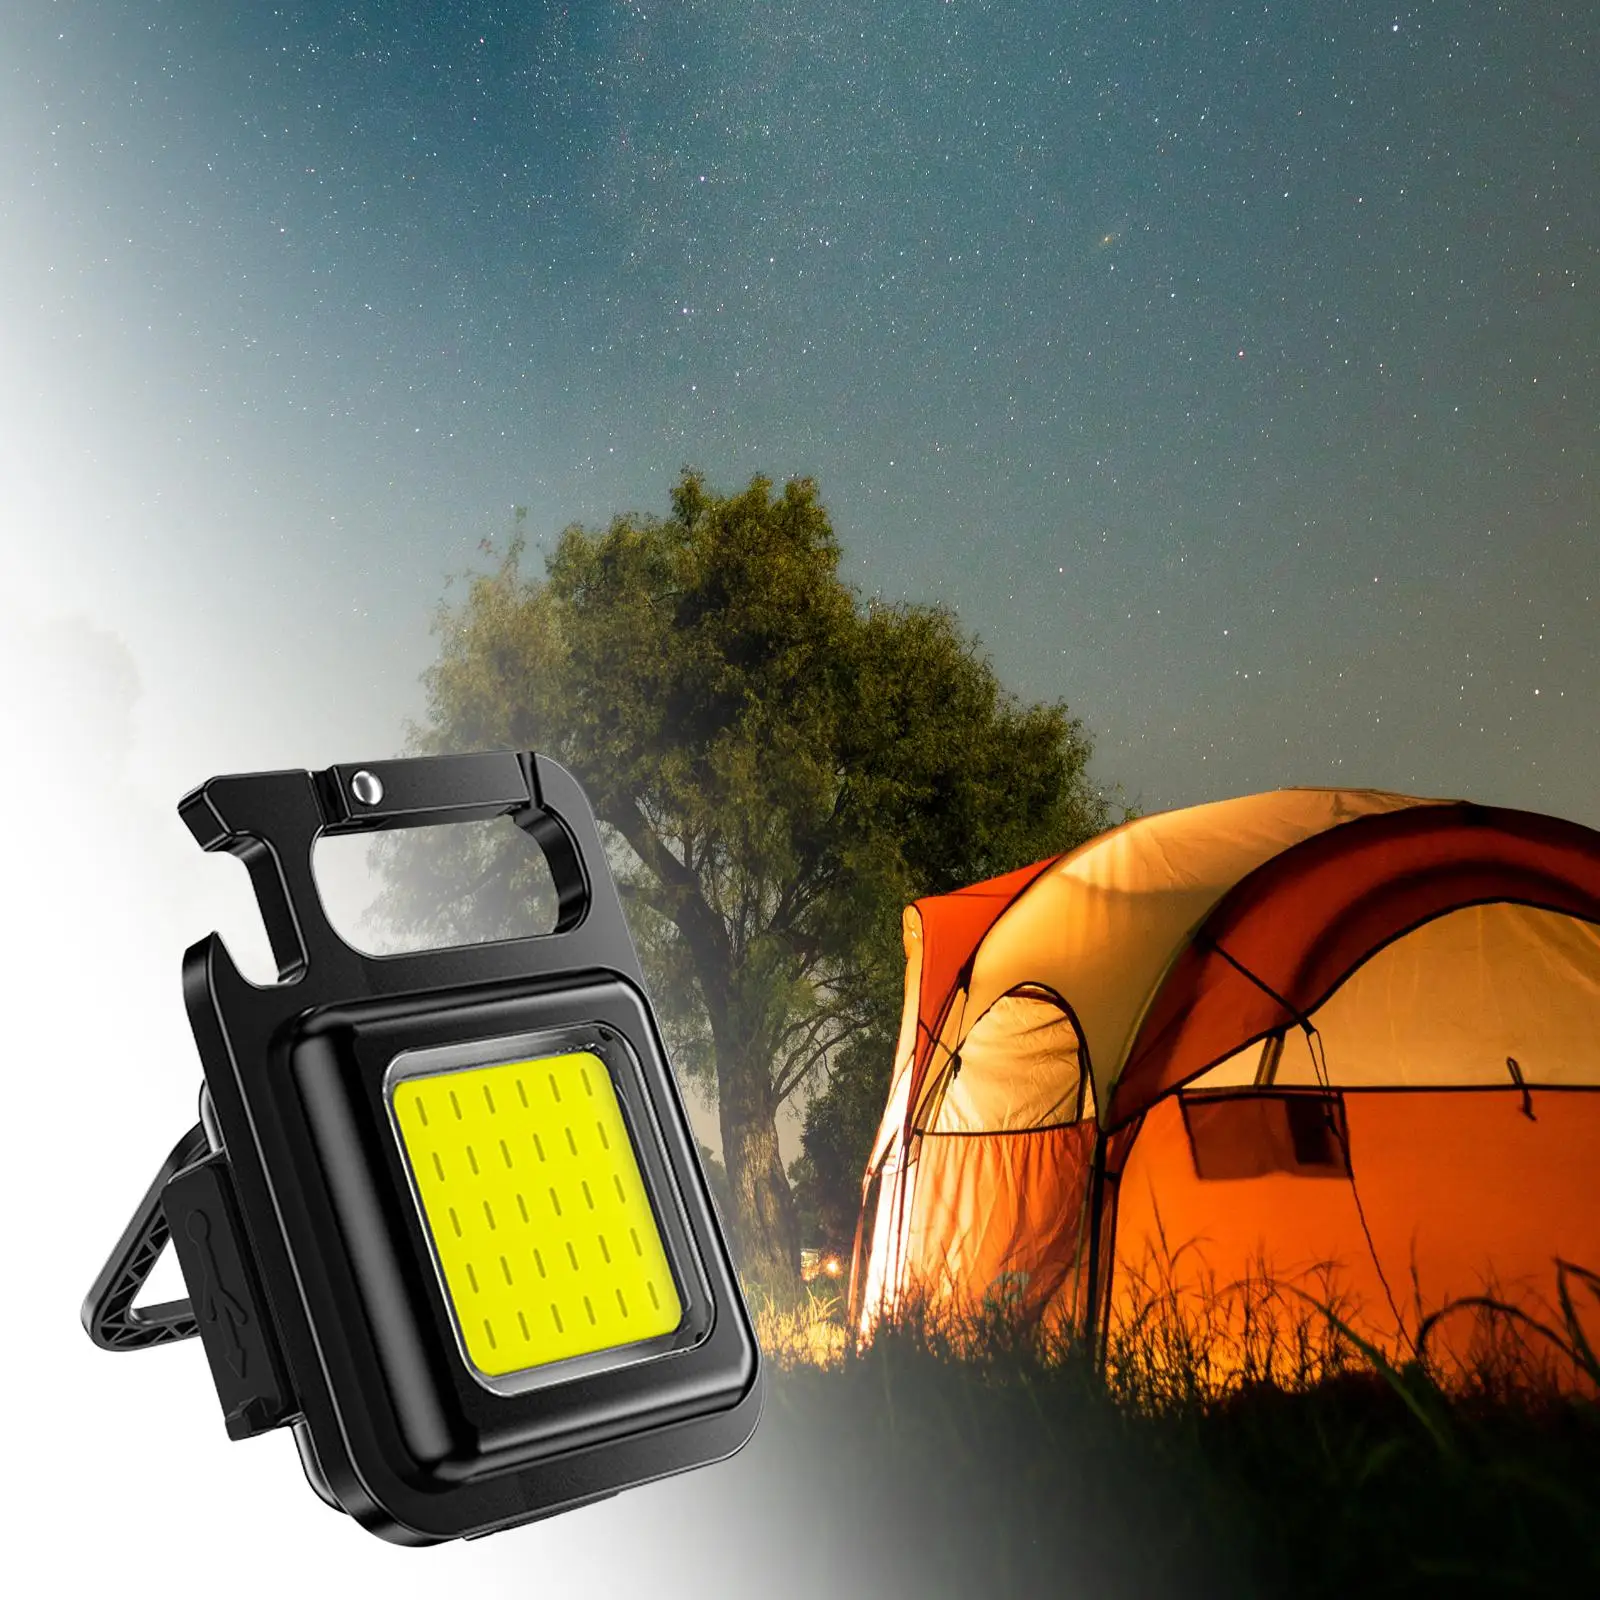 Magnetic COB Flashlight Rechargeable Waterproof Torch Bottle Opener Emergency Light for Camping Walking Outdoor Fishing Hiking